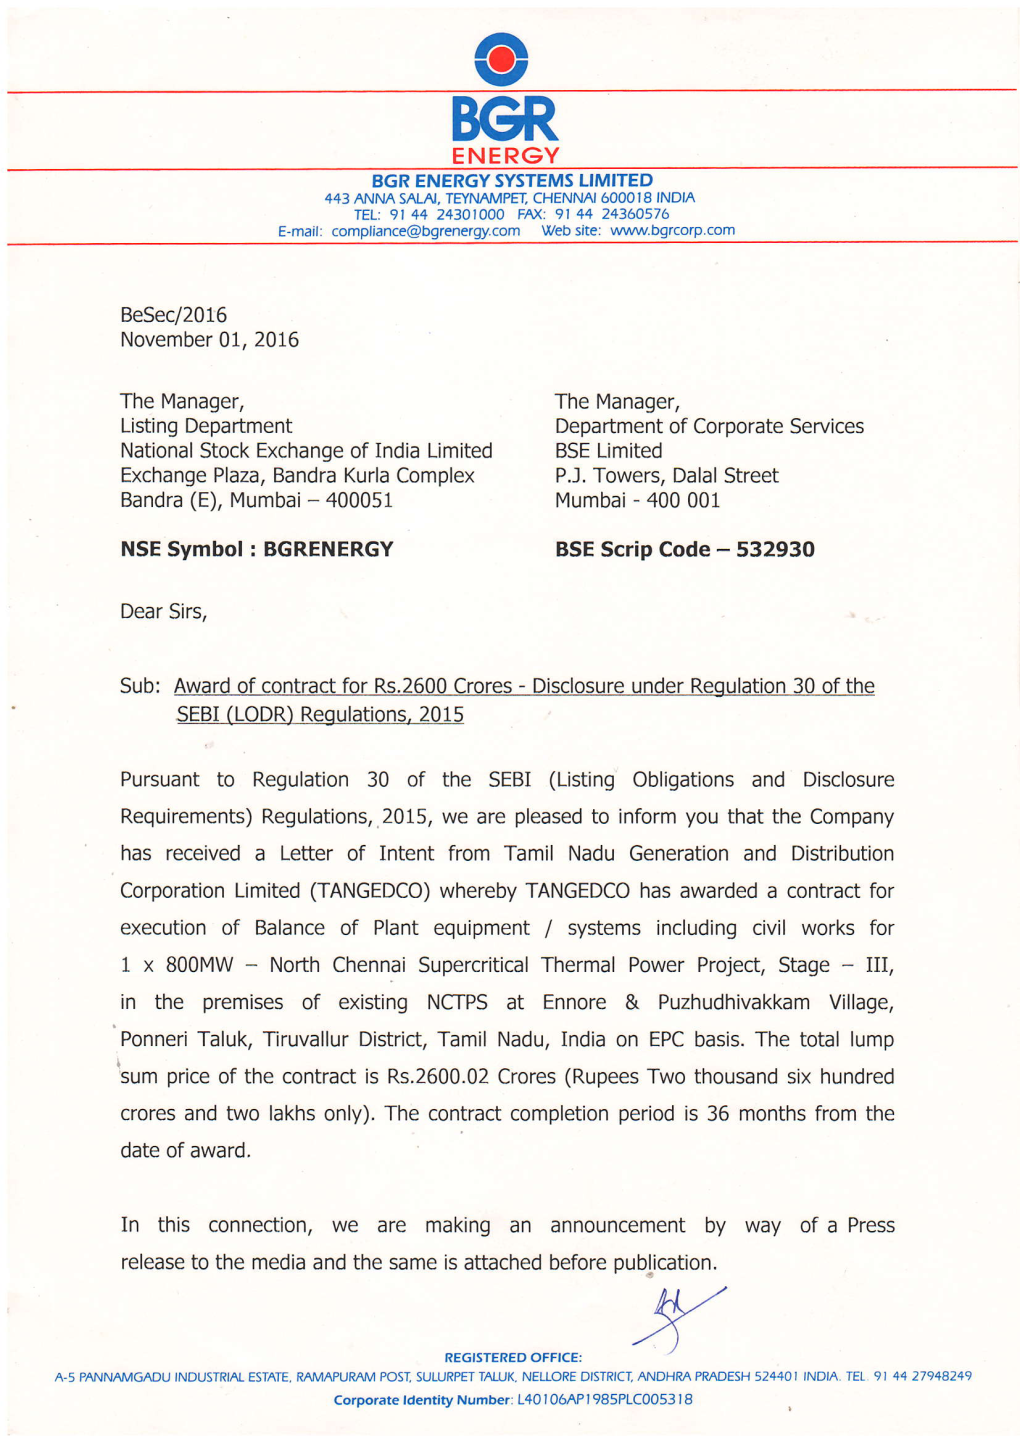 ENERGY Has Received a Letter of Intent from Tamil Nadu Generation